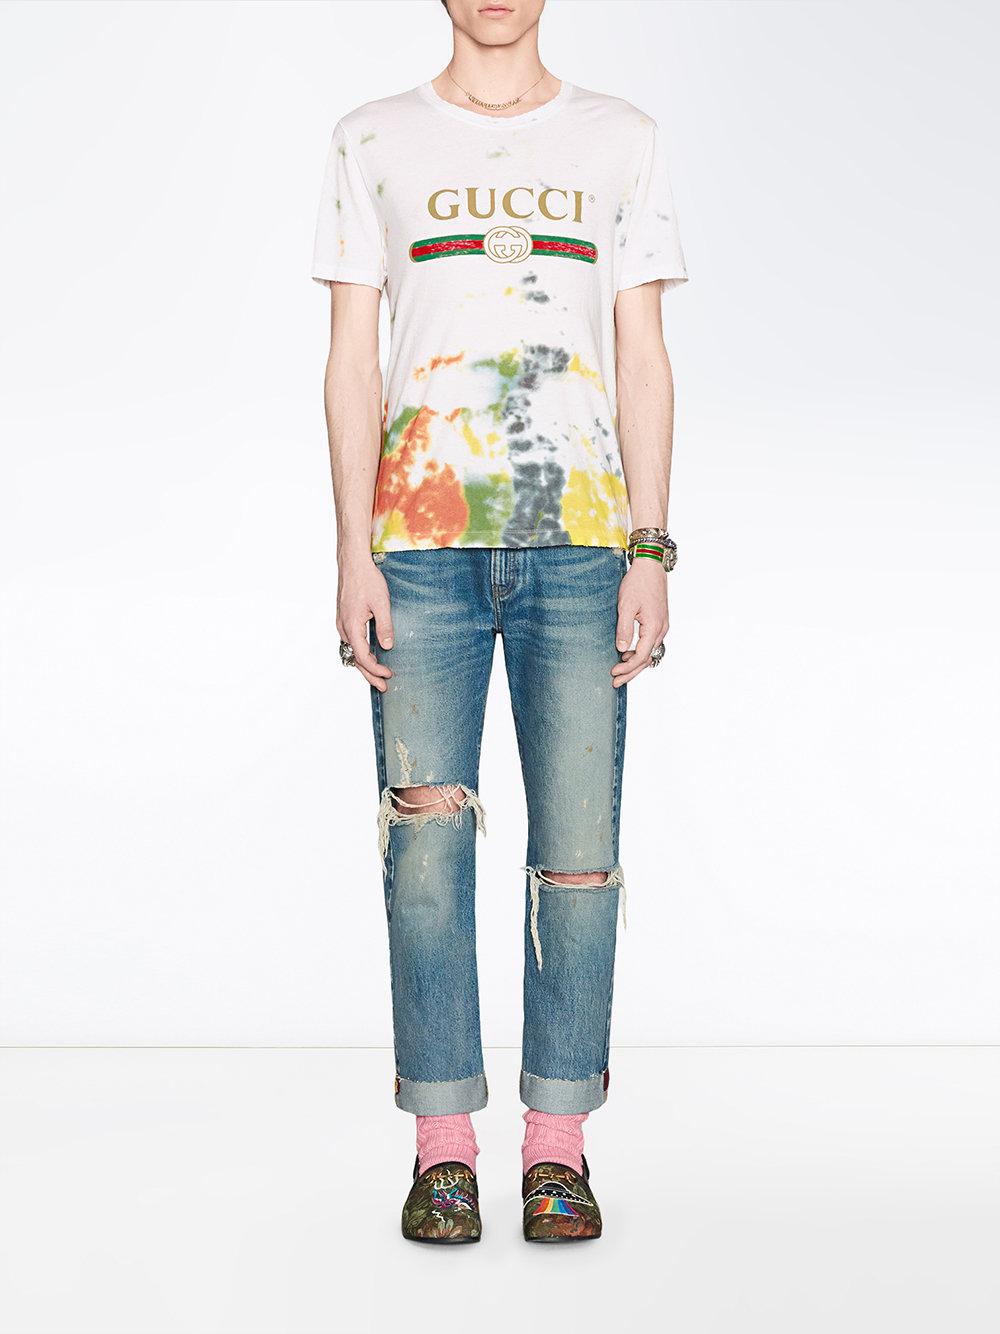 Gucci Cotton Tie-dye T-shirt With Print in White for Men - Lyst